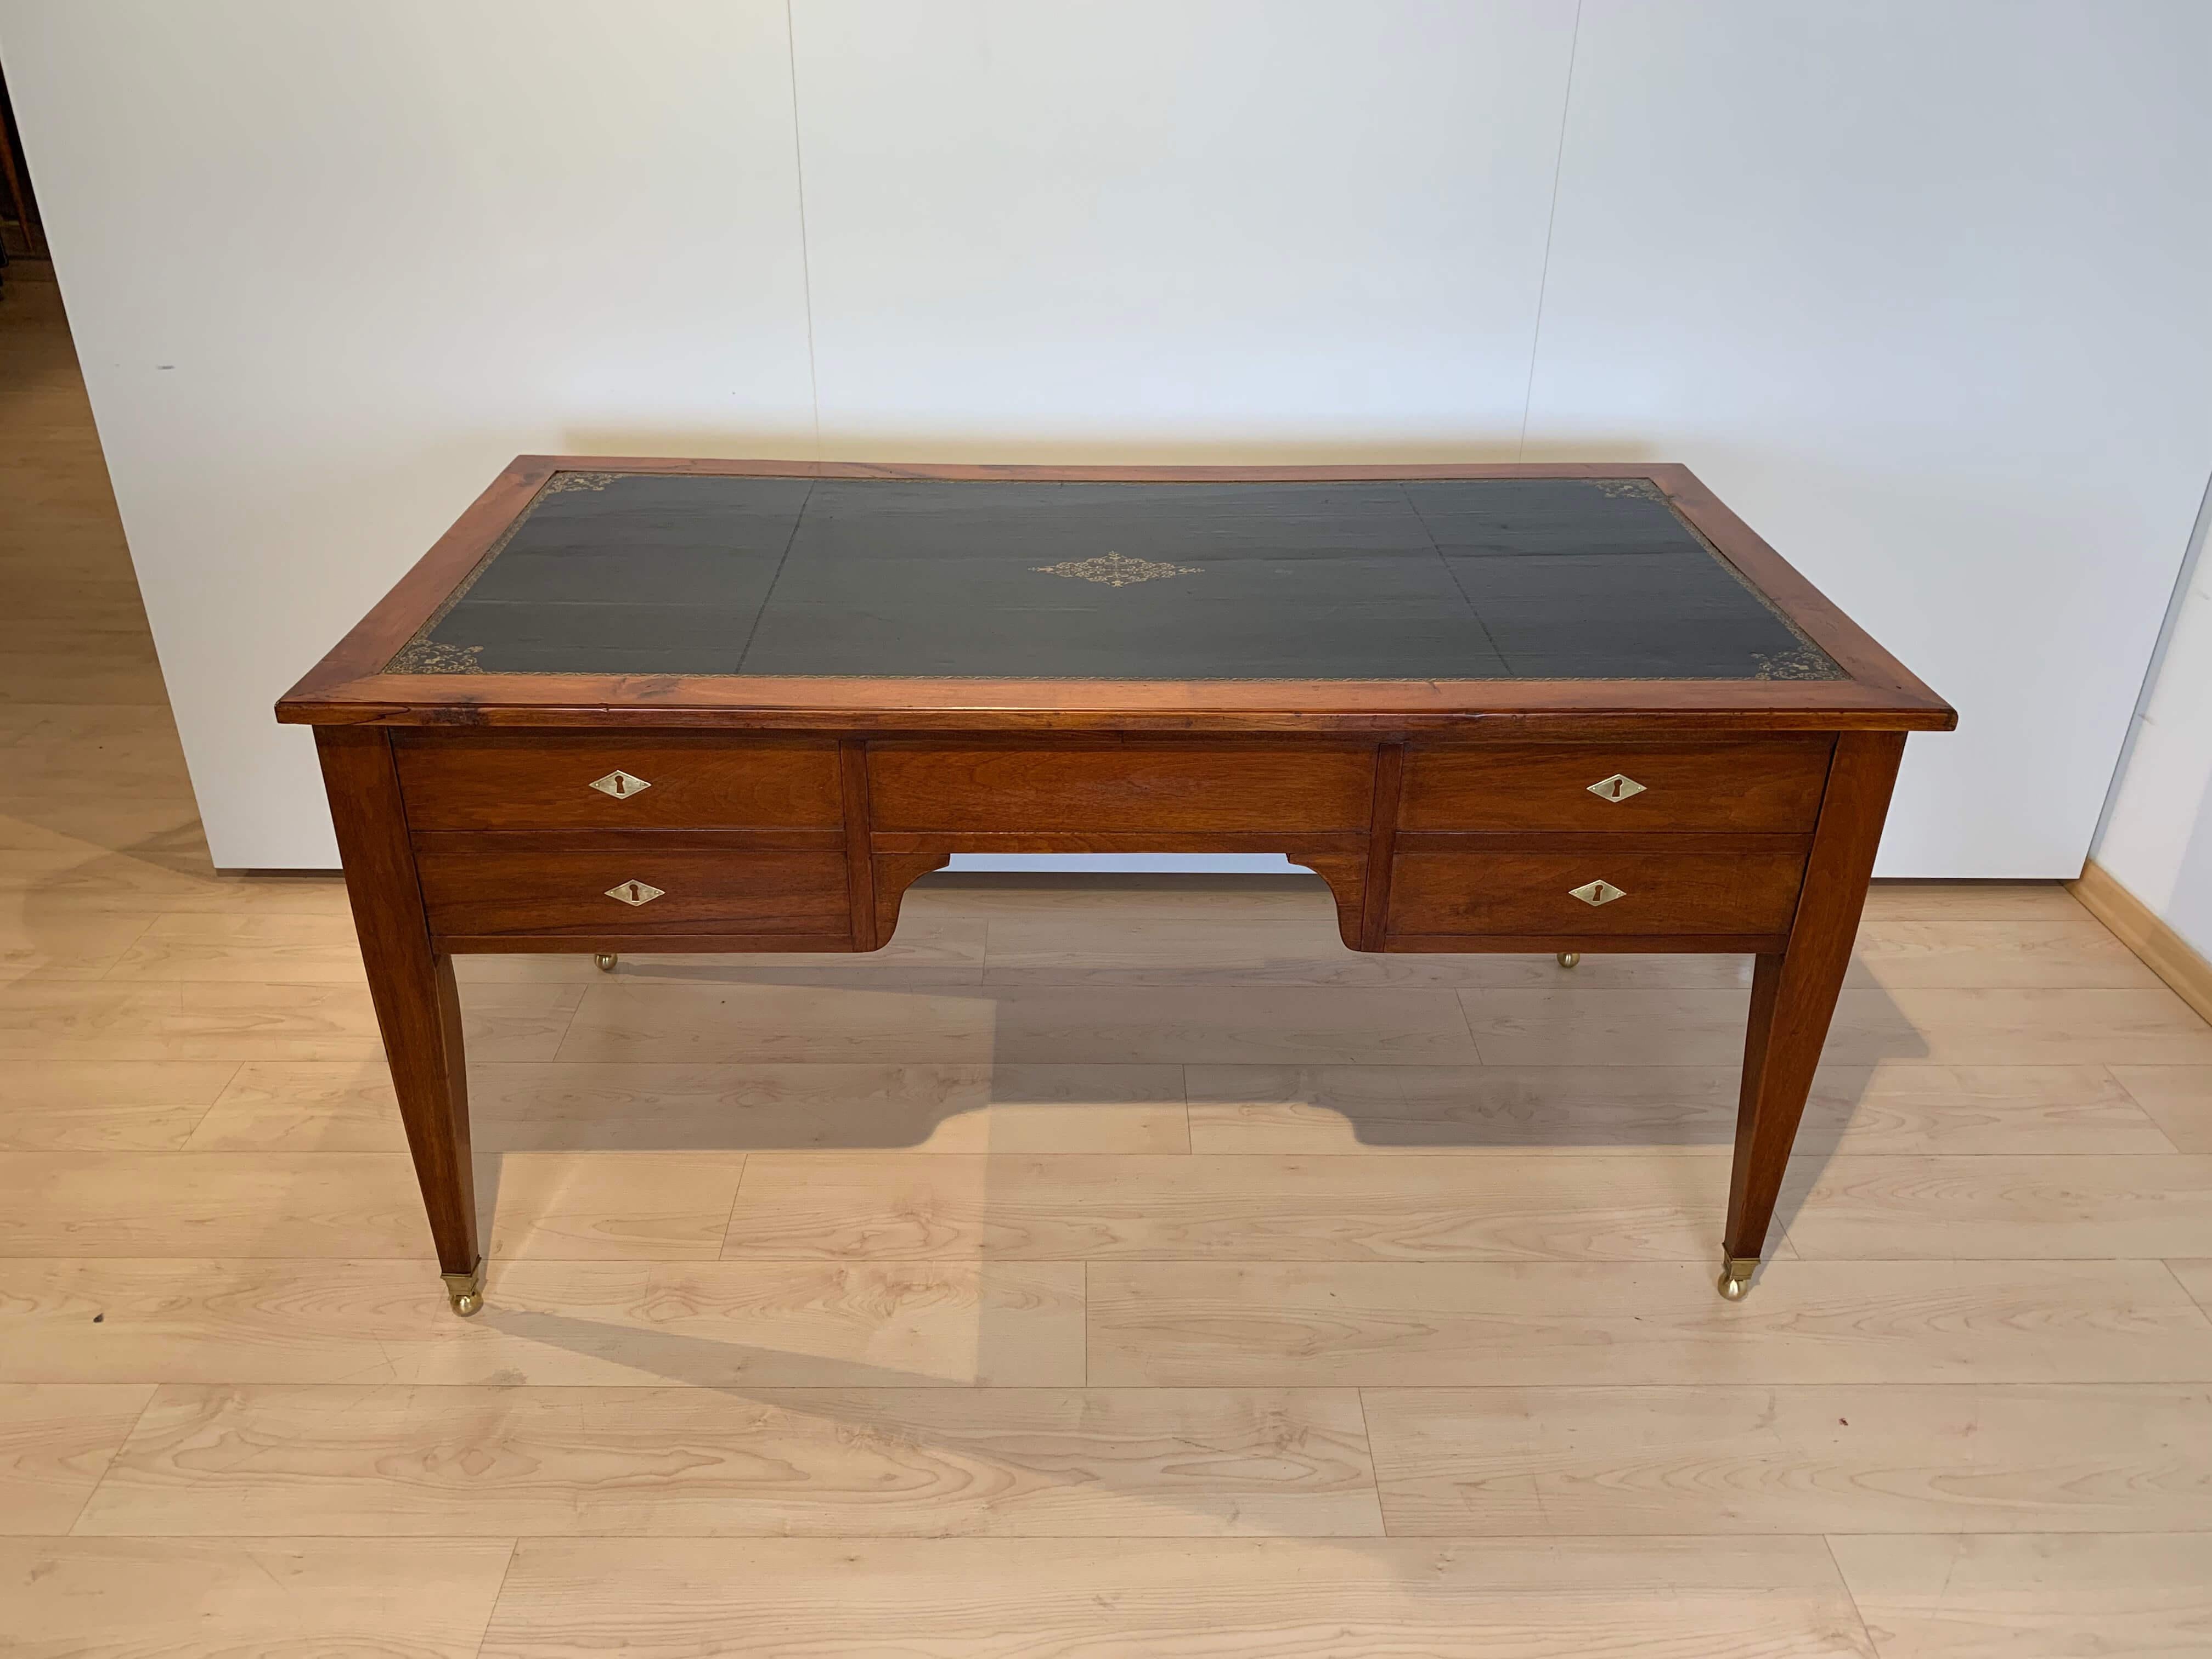 Beautiful, rare French Restauration bureau plat / writing desk in solid walnut and brass with gold-embossed leather plate from france around 1820.

Original Neoclassical French Restauration / Biedermeier desk, expandable on two sides with pull-out